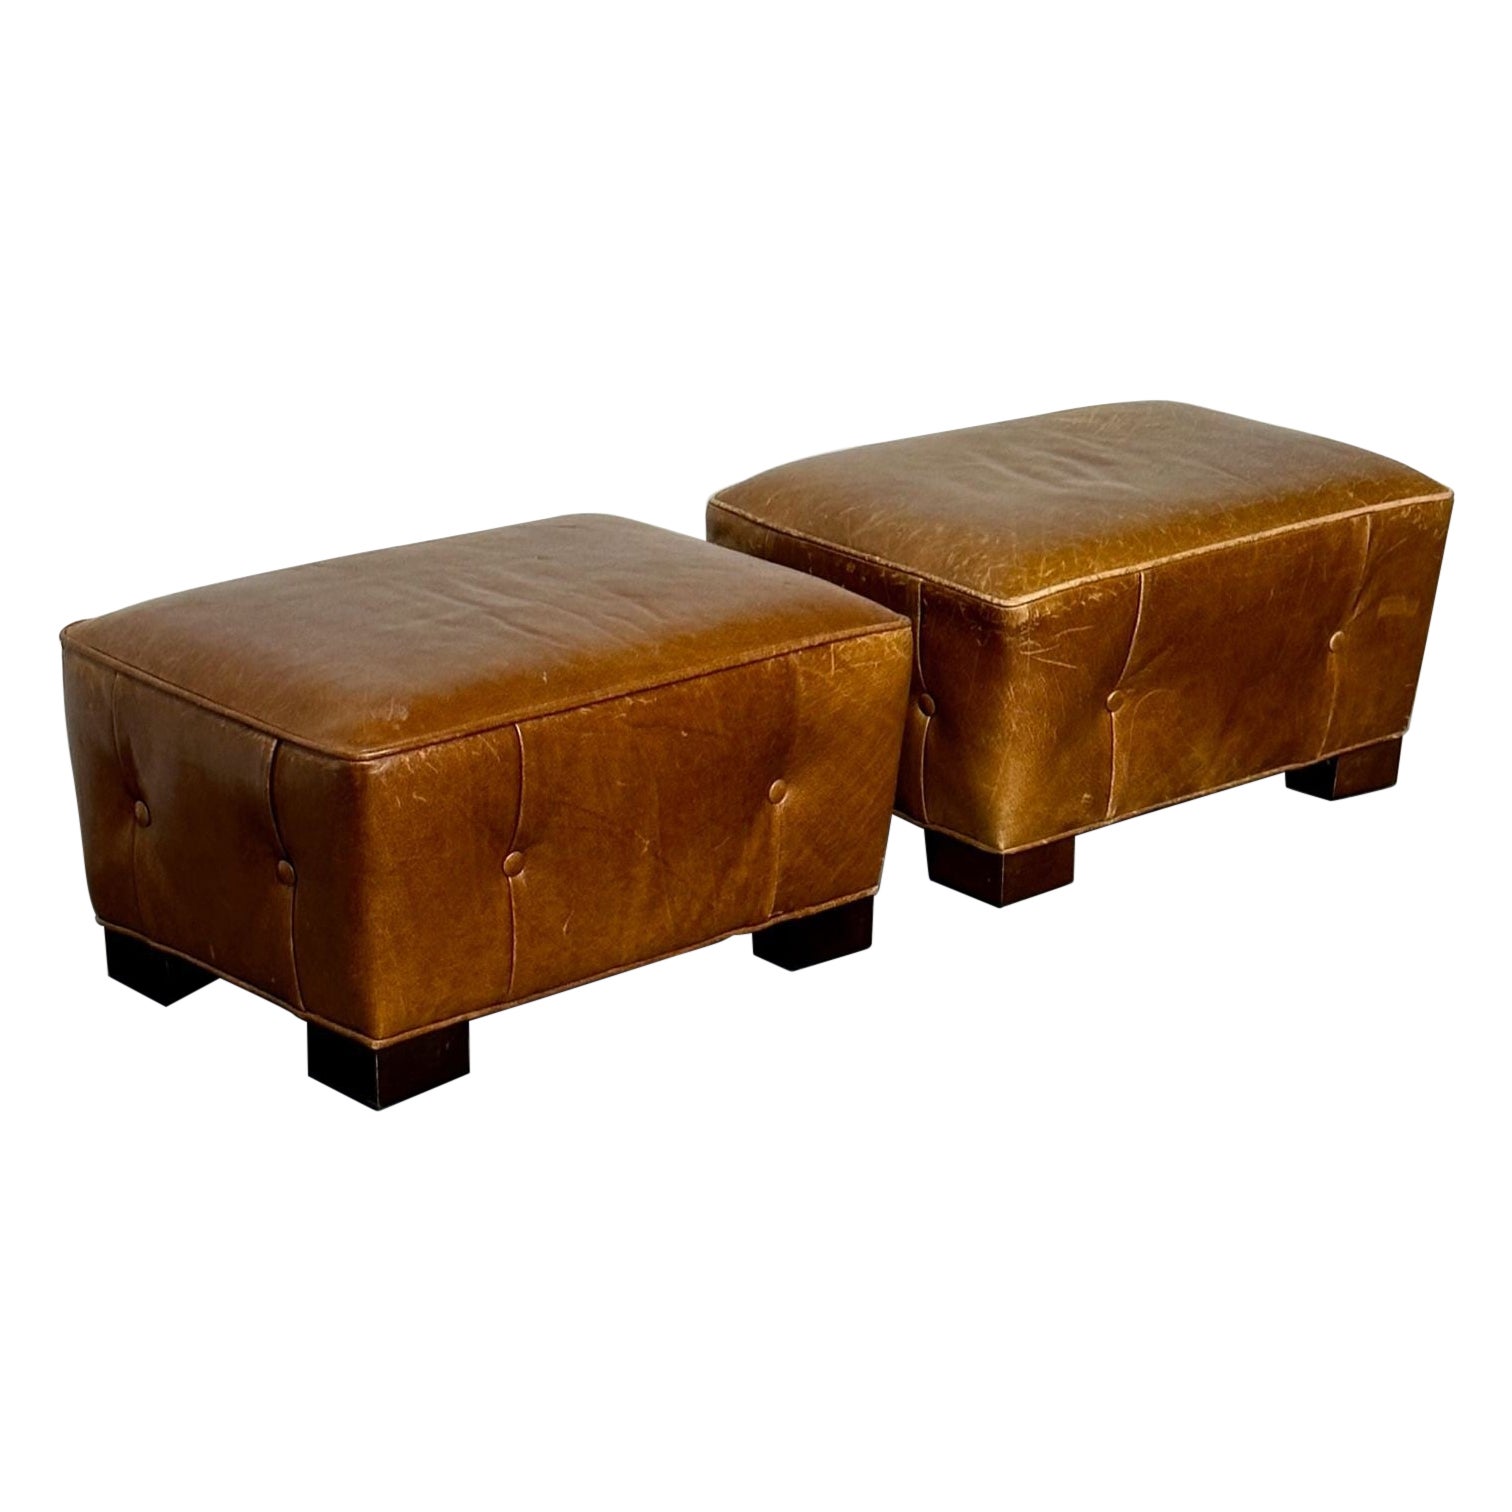 French Designer, Art Deco, Ottomans, Footstools, Distressed Leather, 1930s For Sale